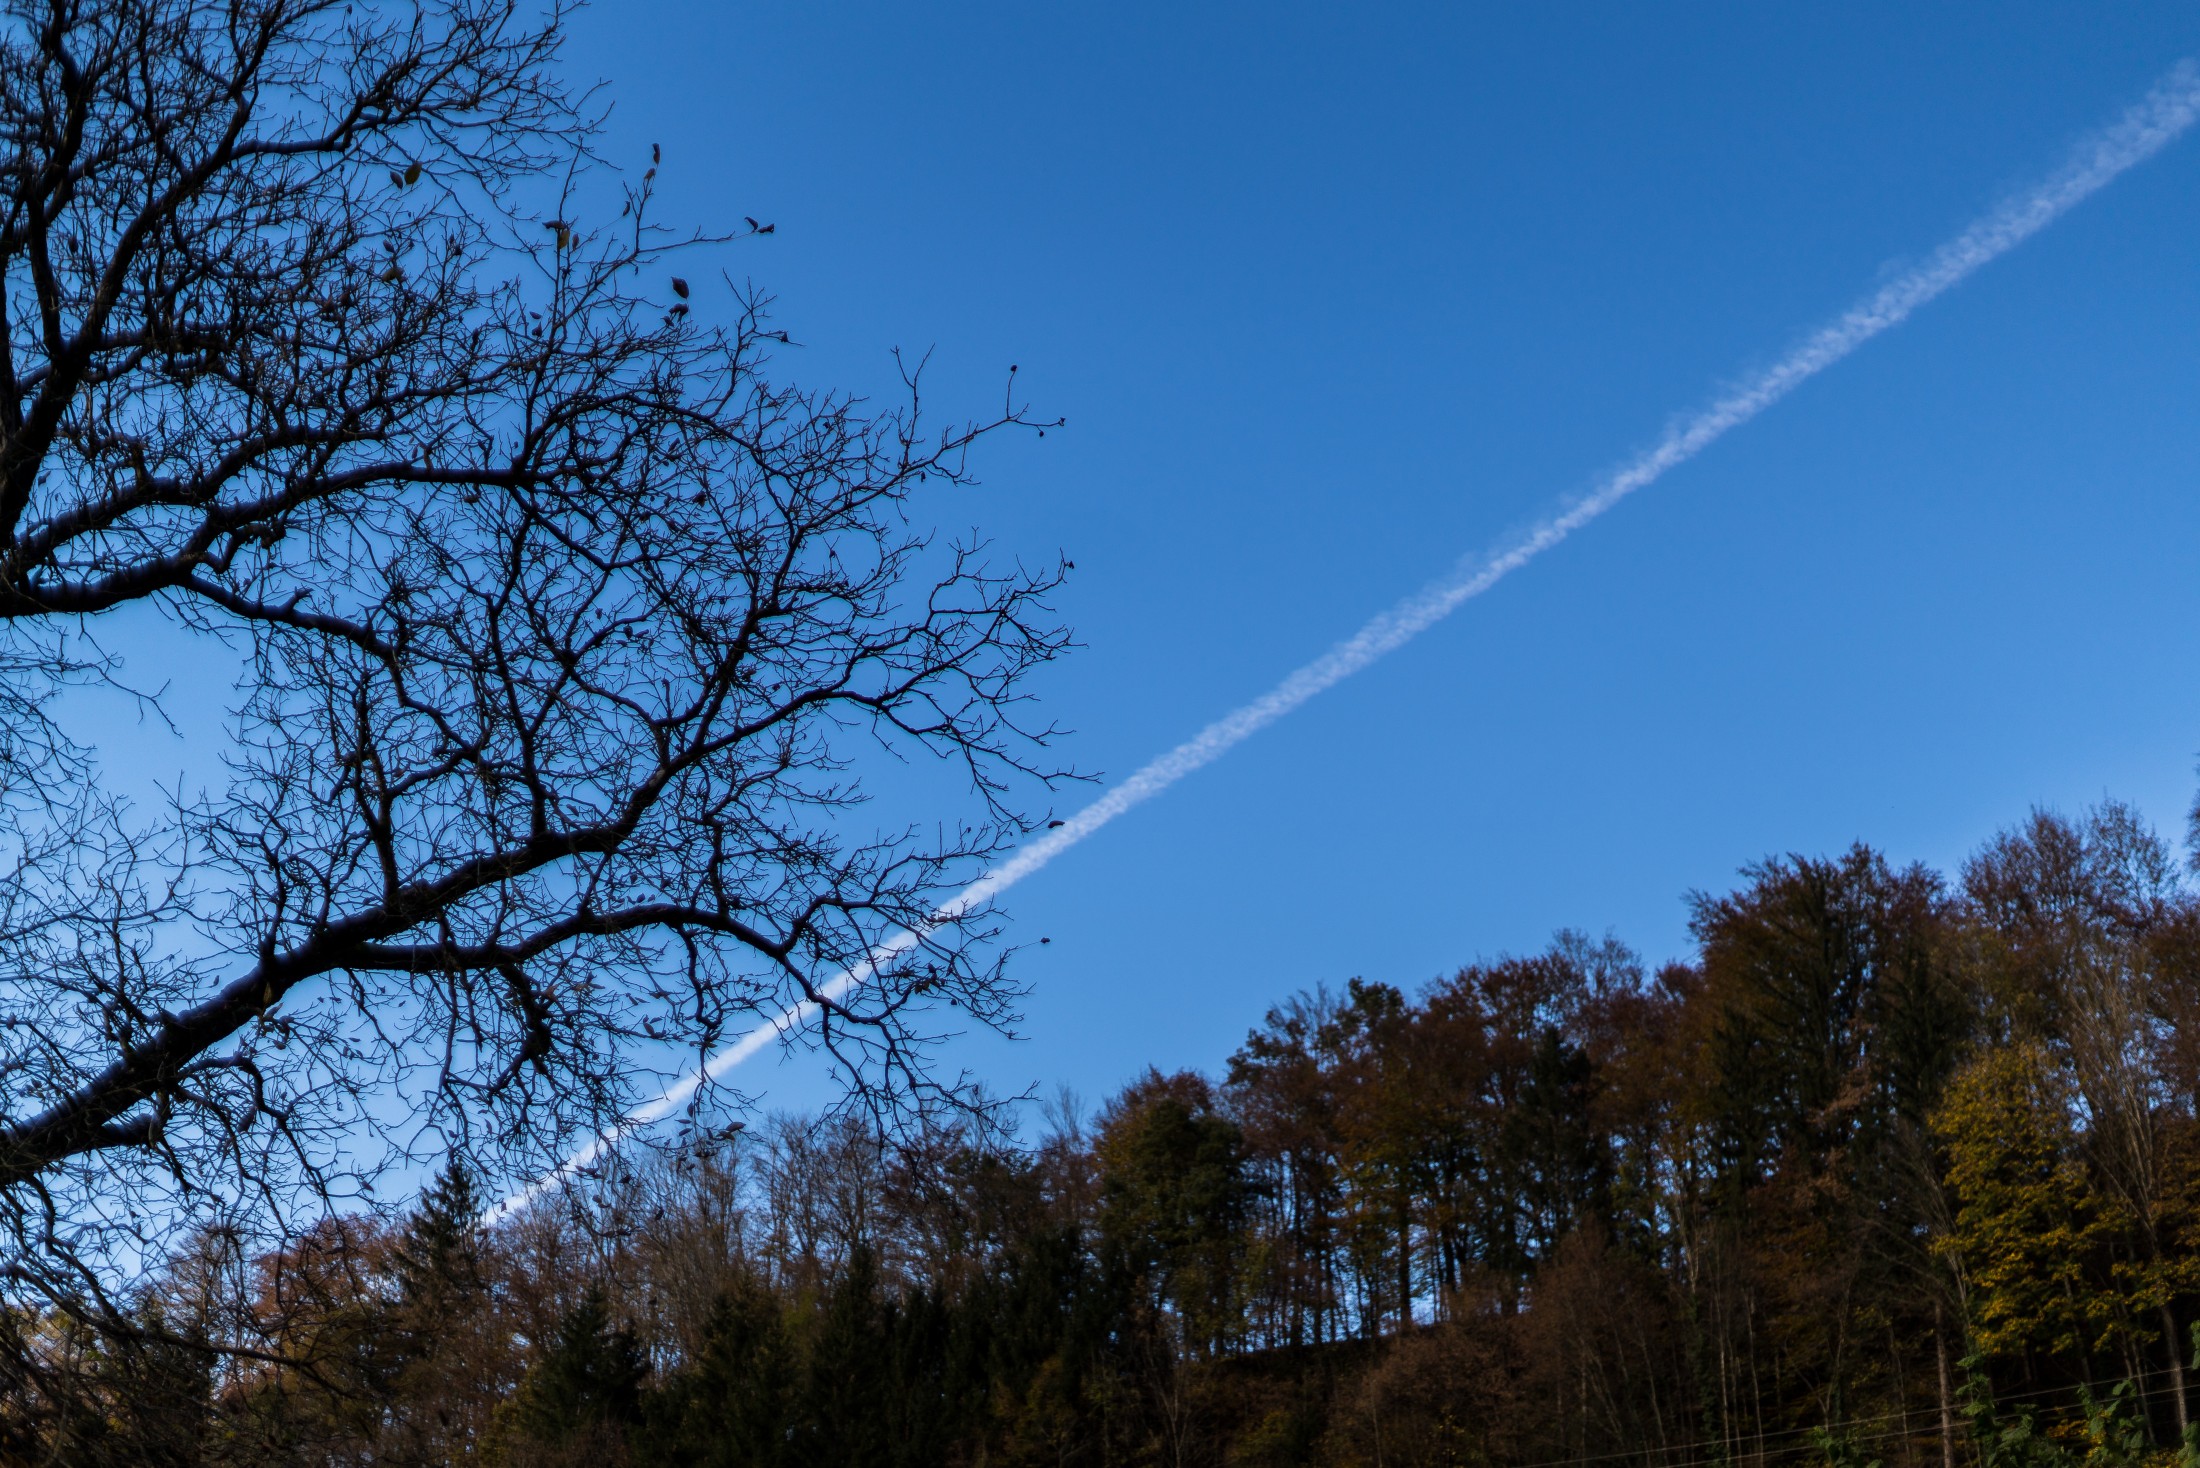 Plane trail crossing the sky